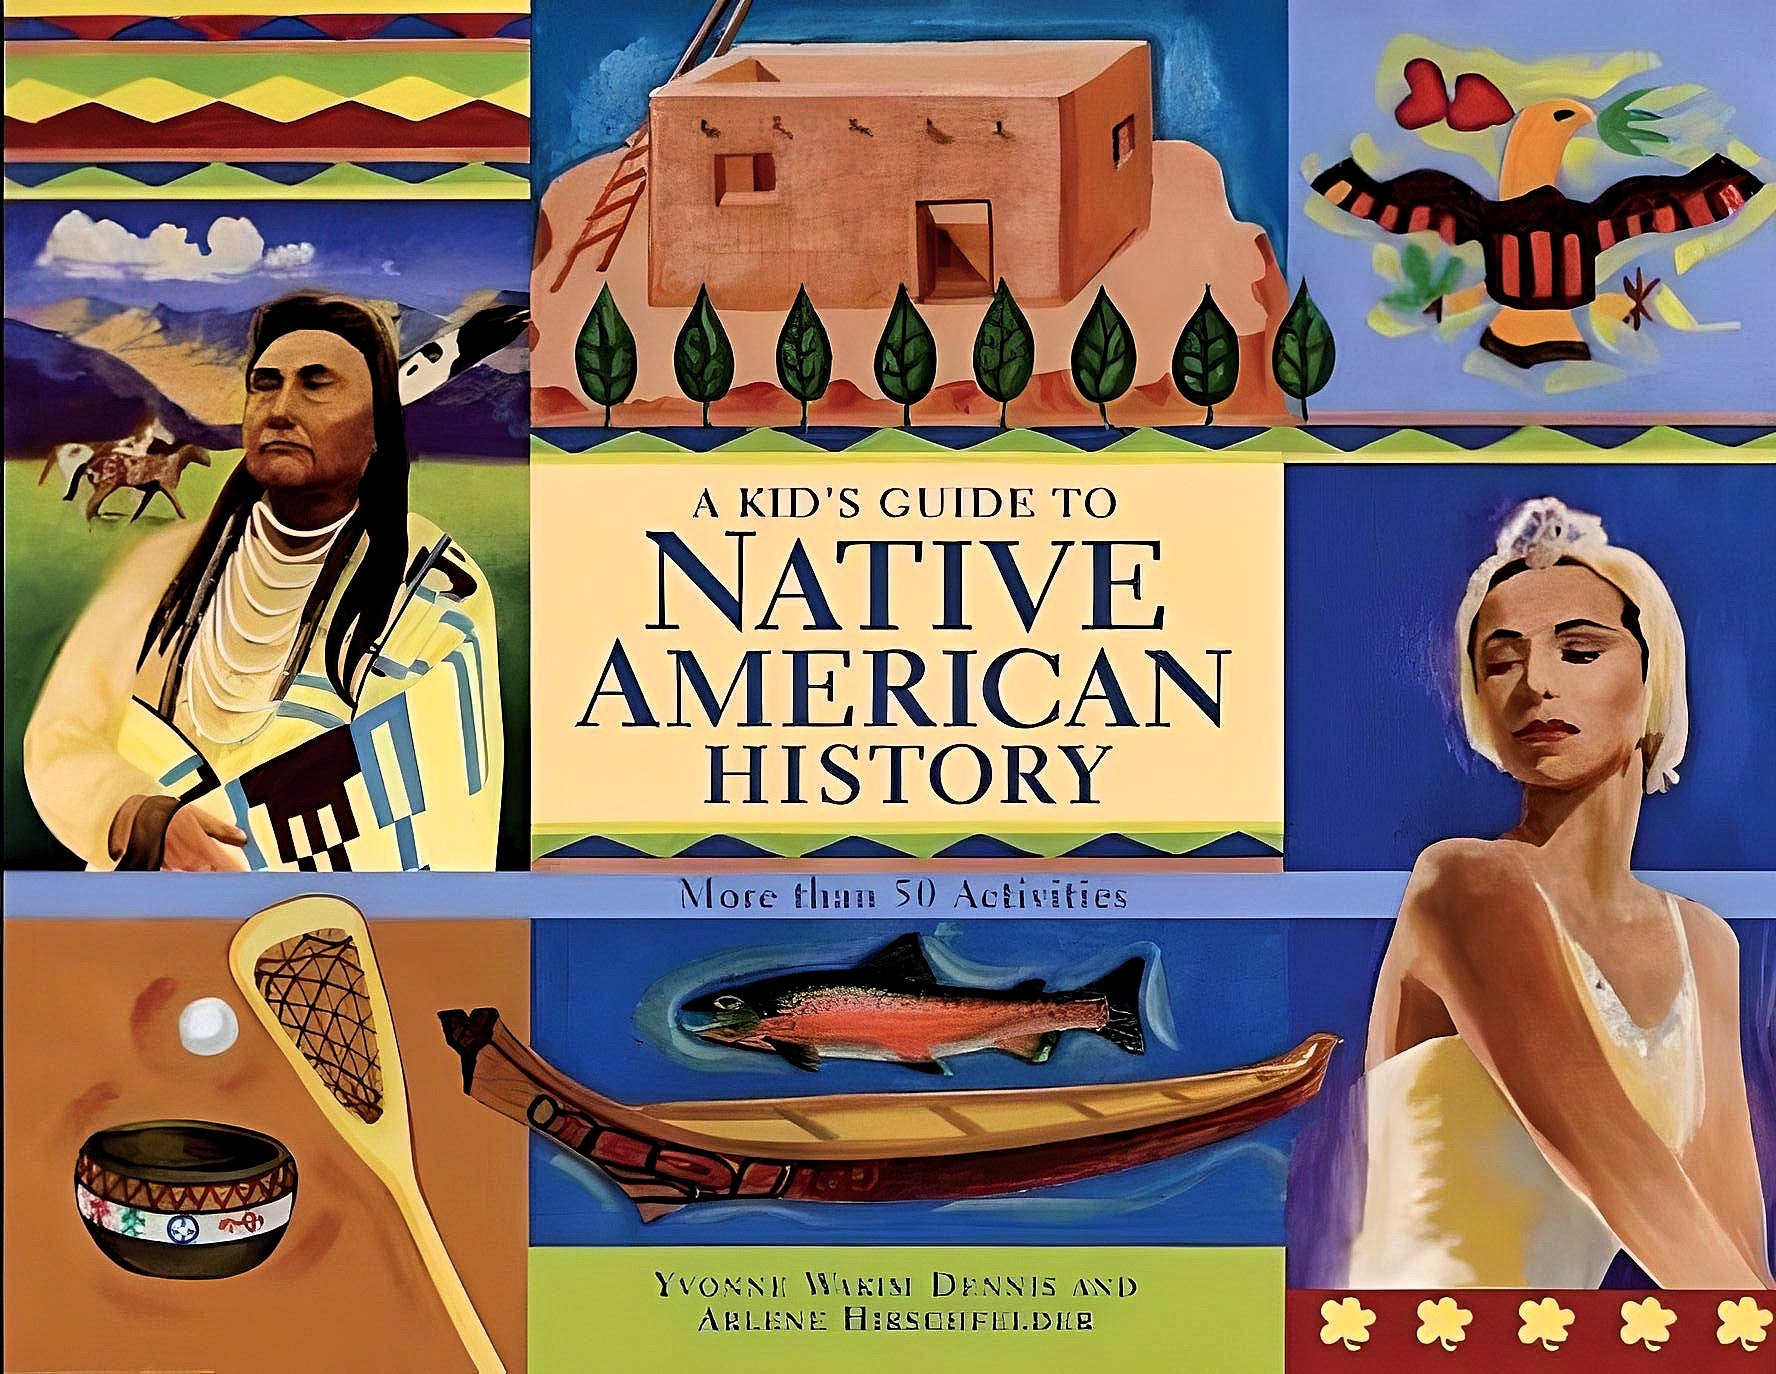 A Kids Guide to Native American History